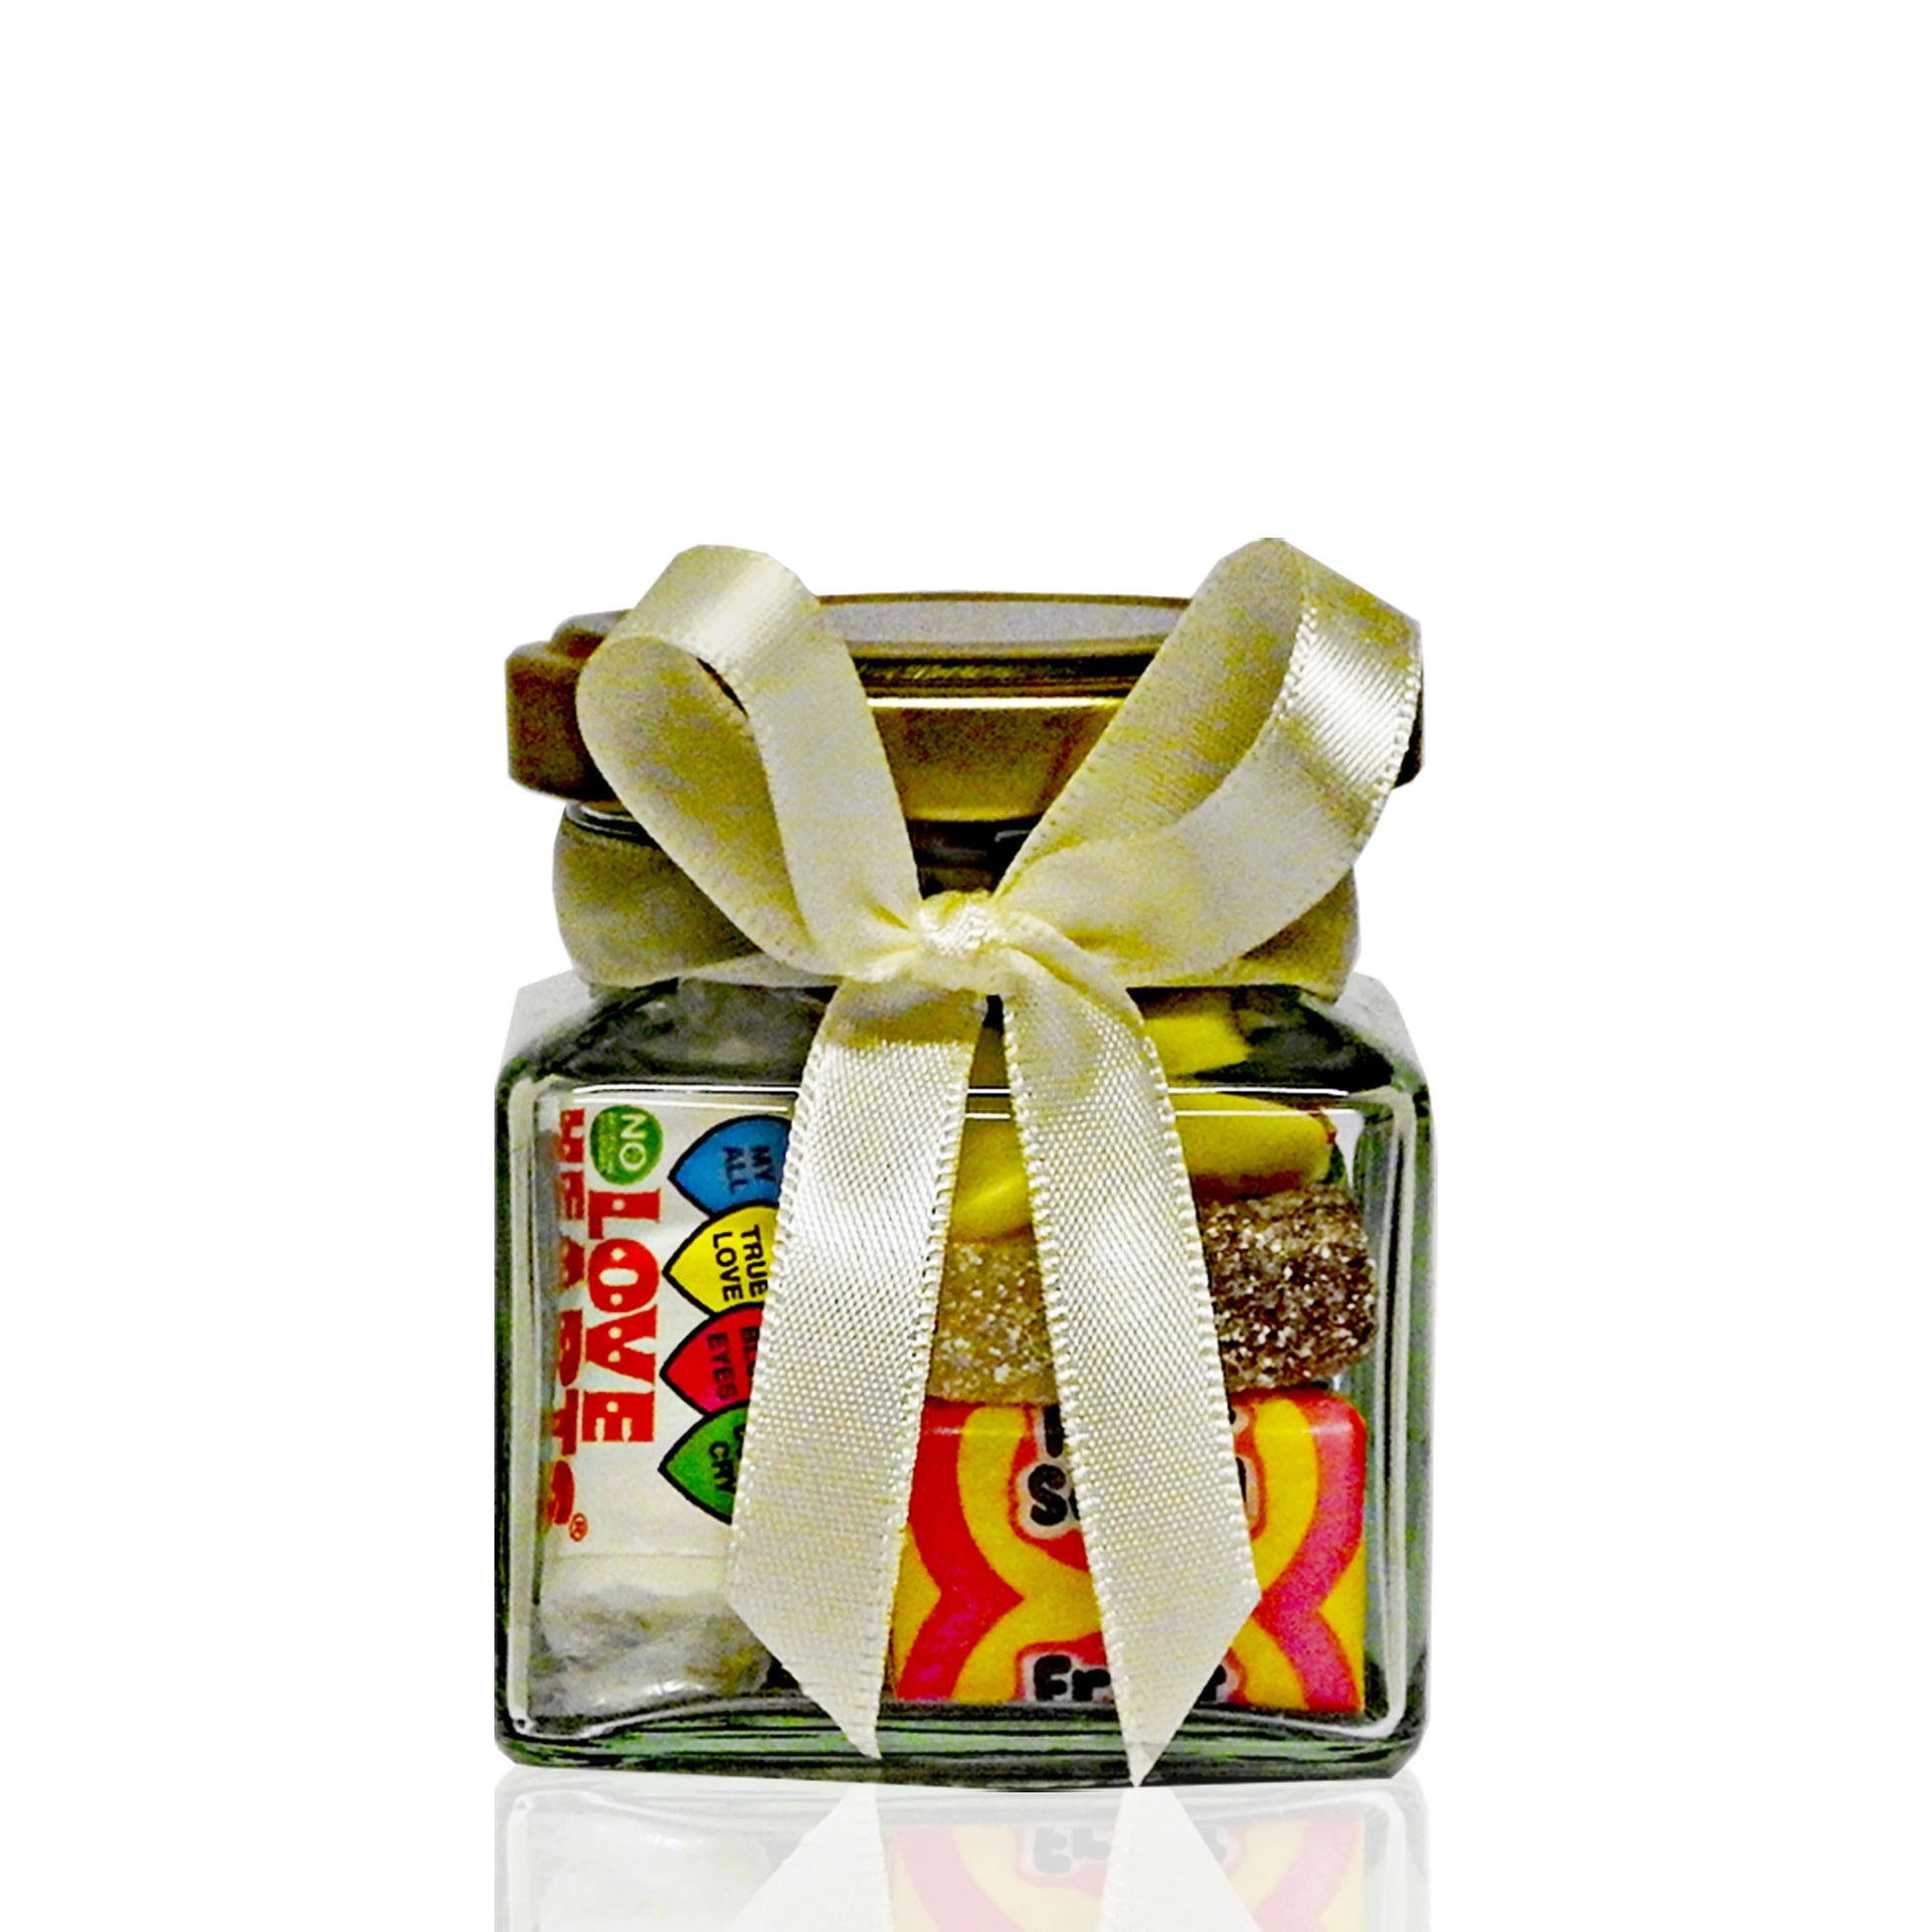 A Mini Jar of Retro Sweets - Retro Sweets at The Sweetie Jar